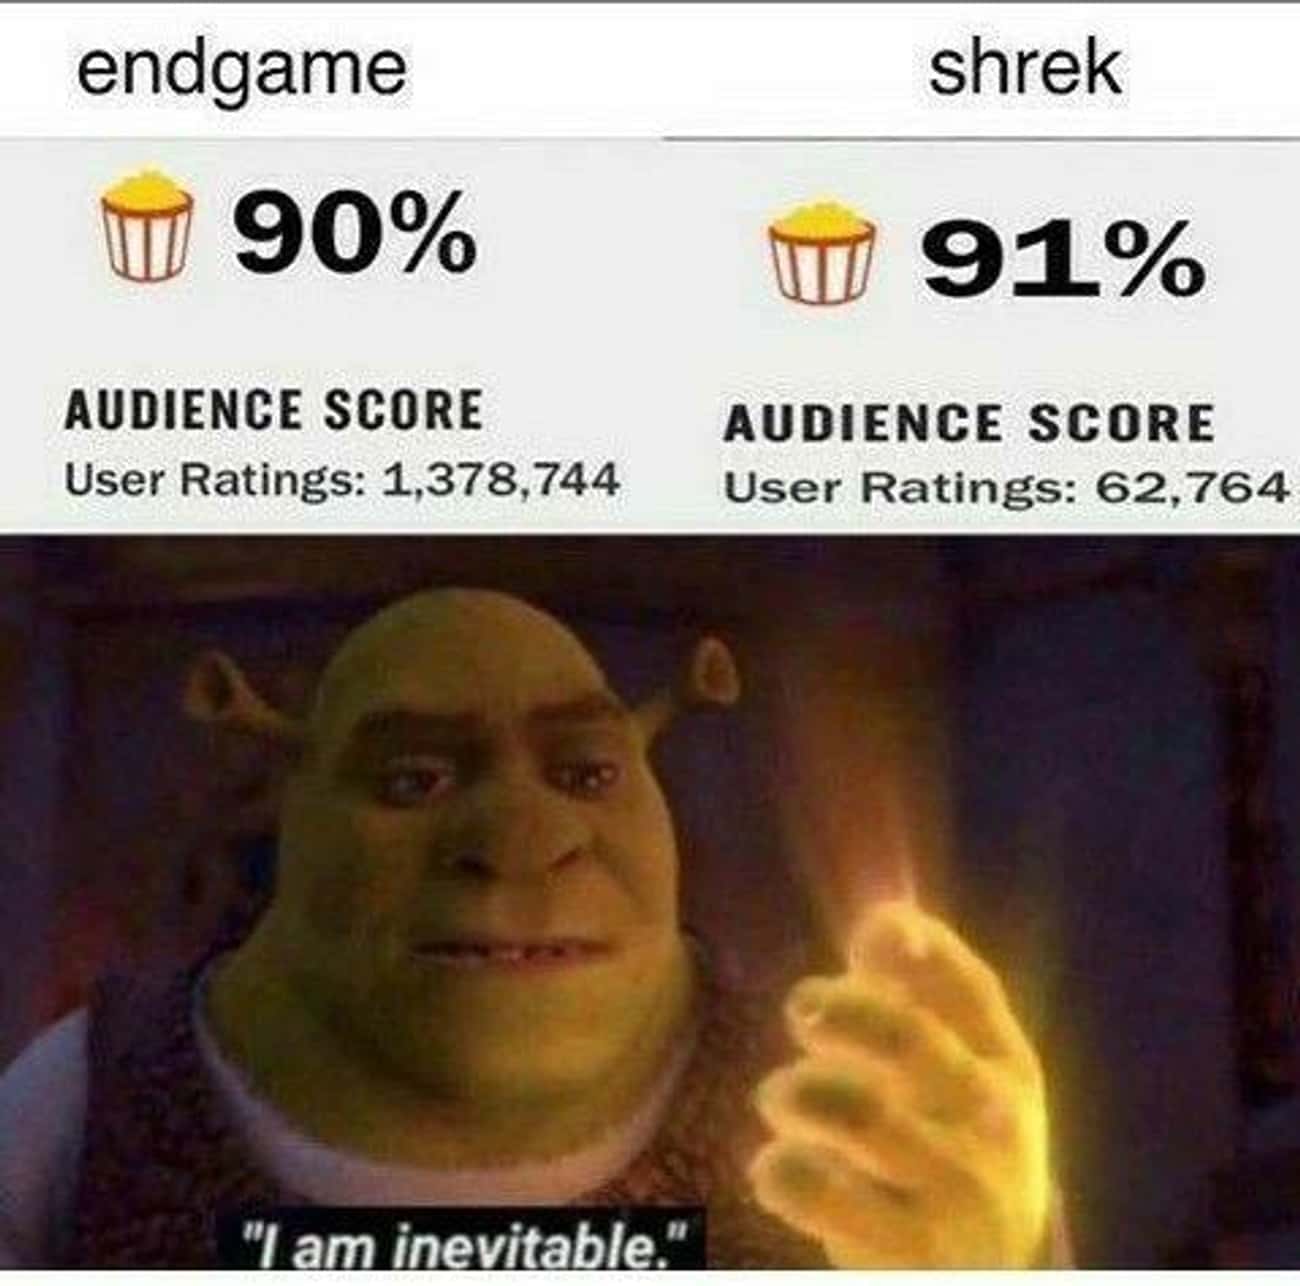 The Audience Scores Never Lie